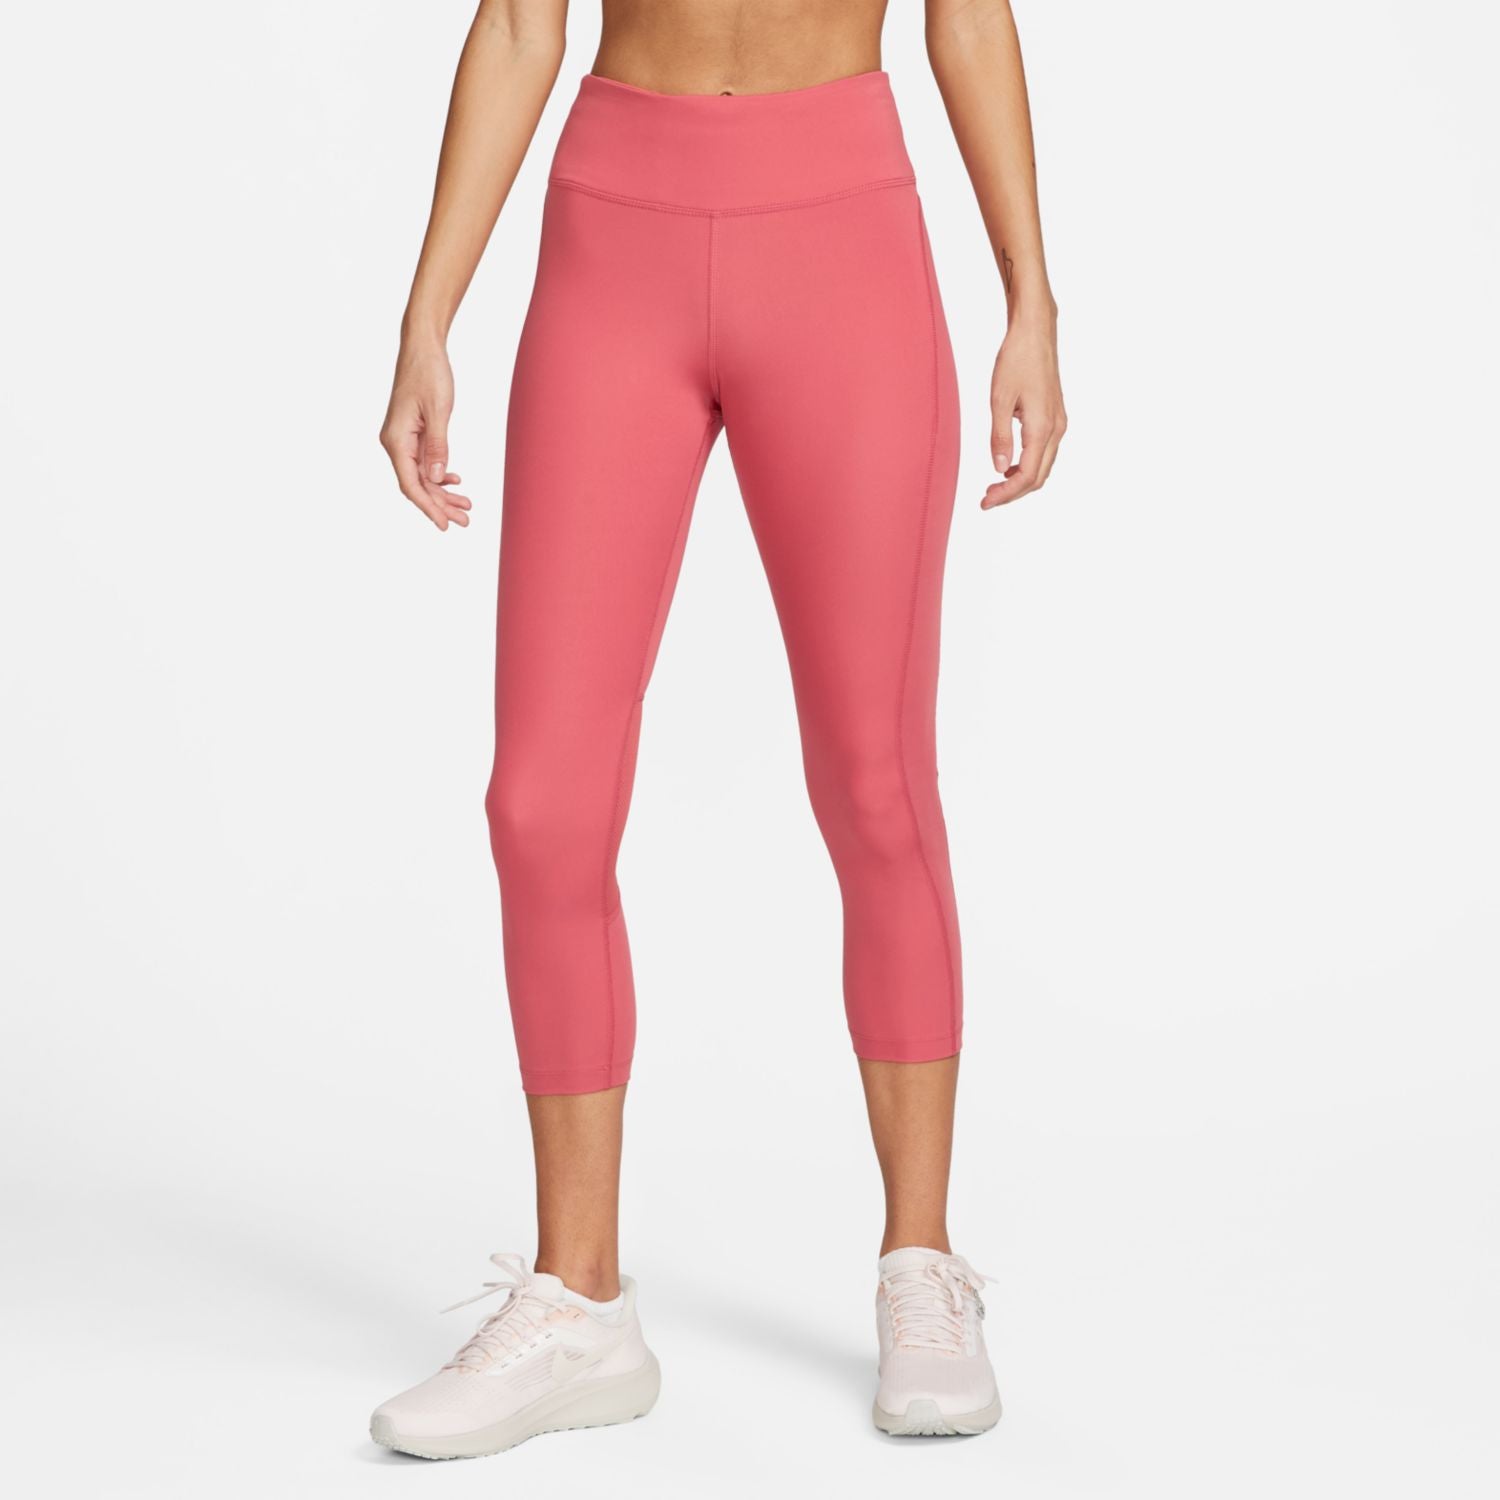 Nike Women's Running Epic Fast Tight - CZ9240-084 - SixtyTwo